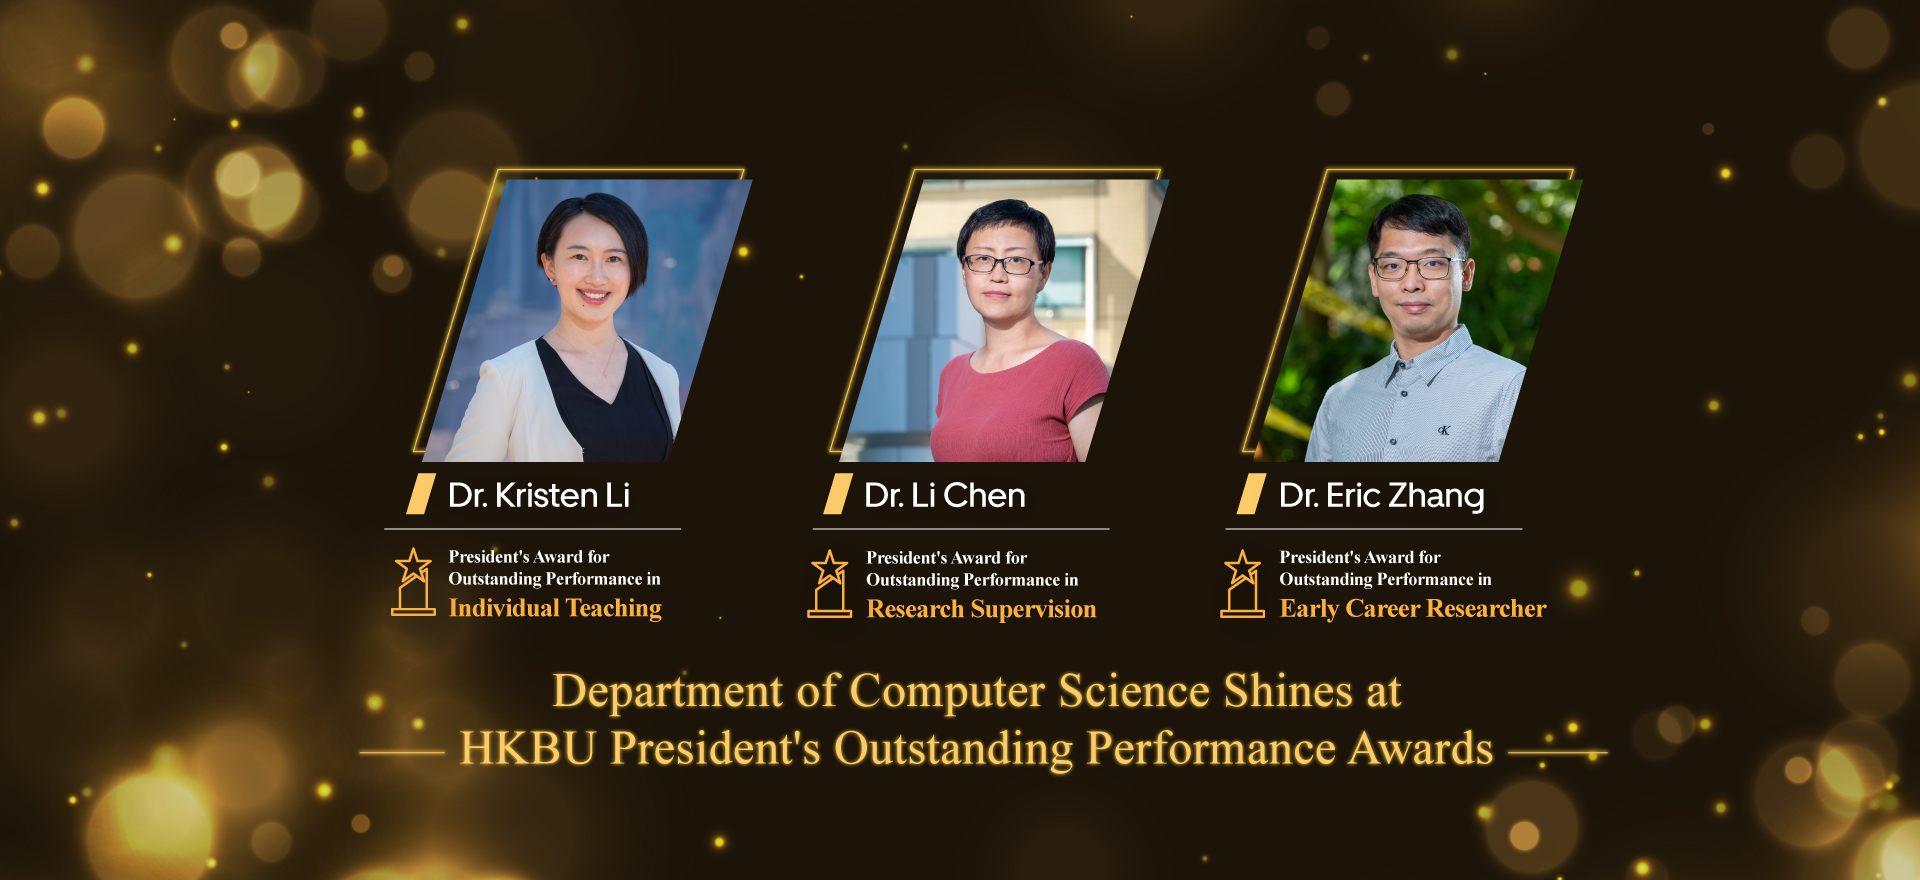 Dr. Xin Huang Receives President’s Award for Outstanding Performance in Young Researcher